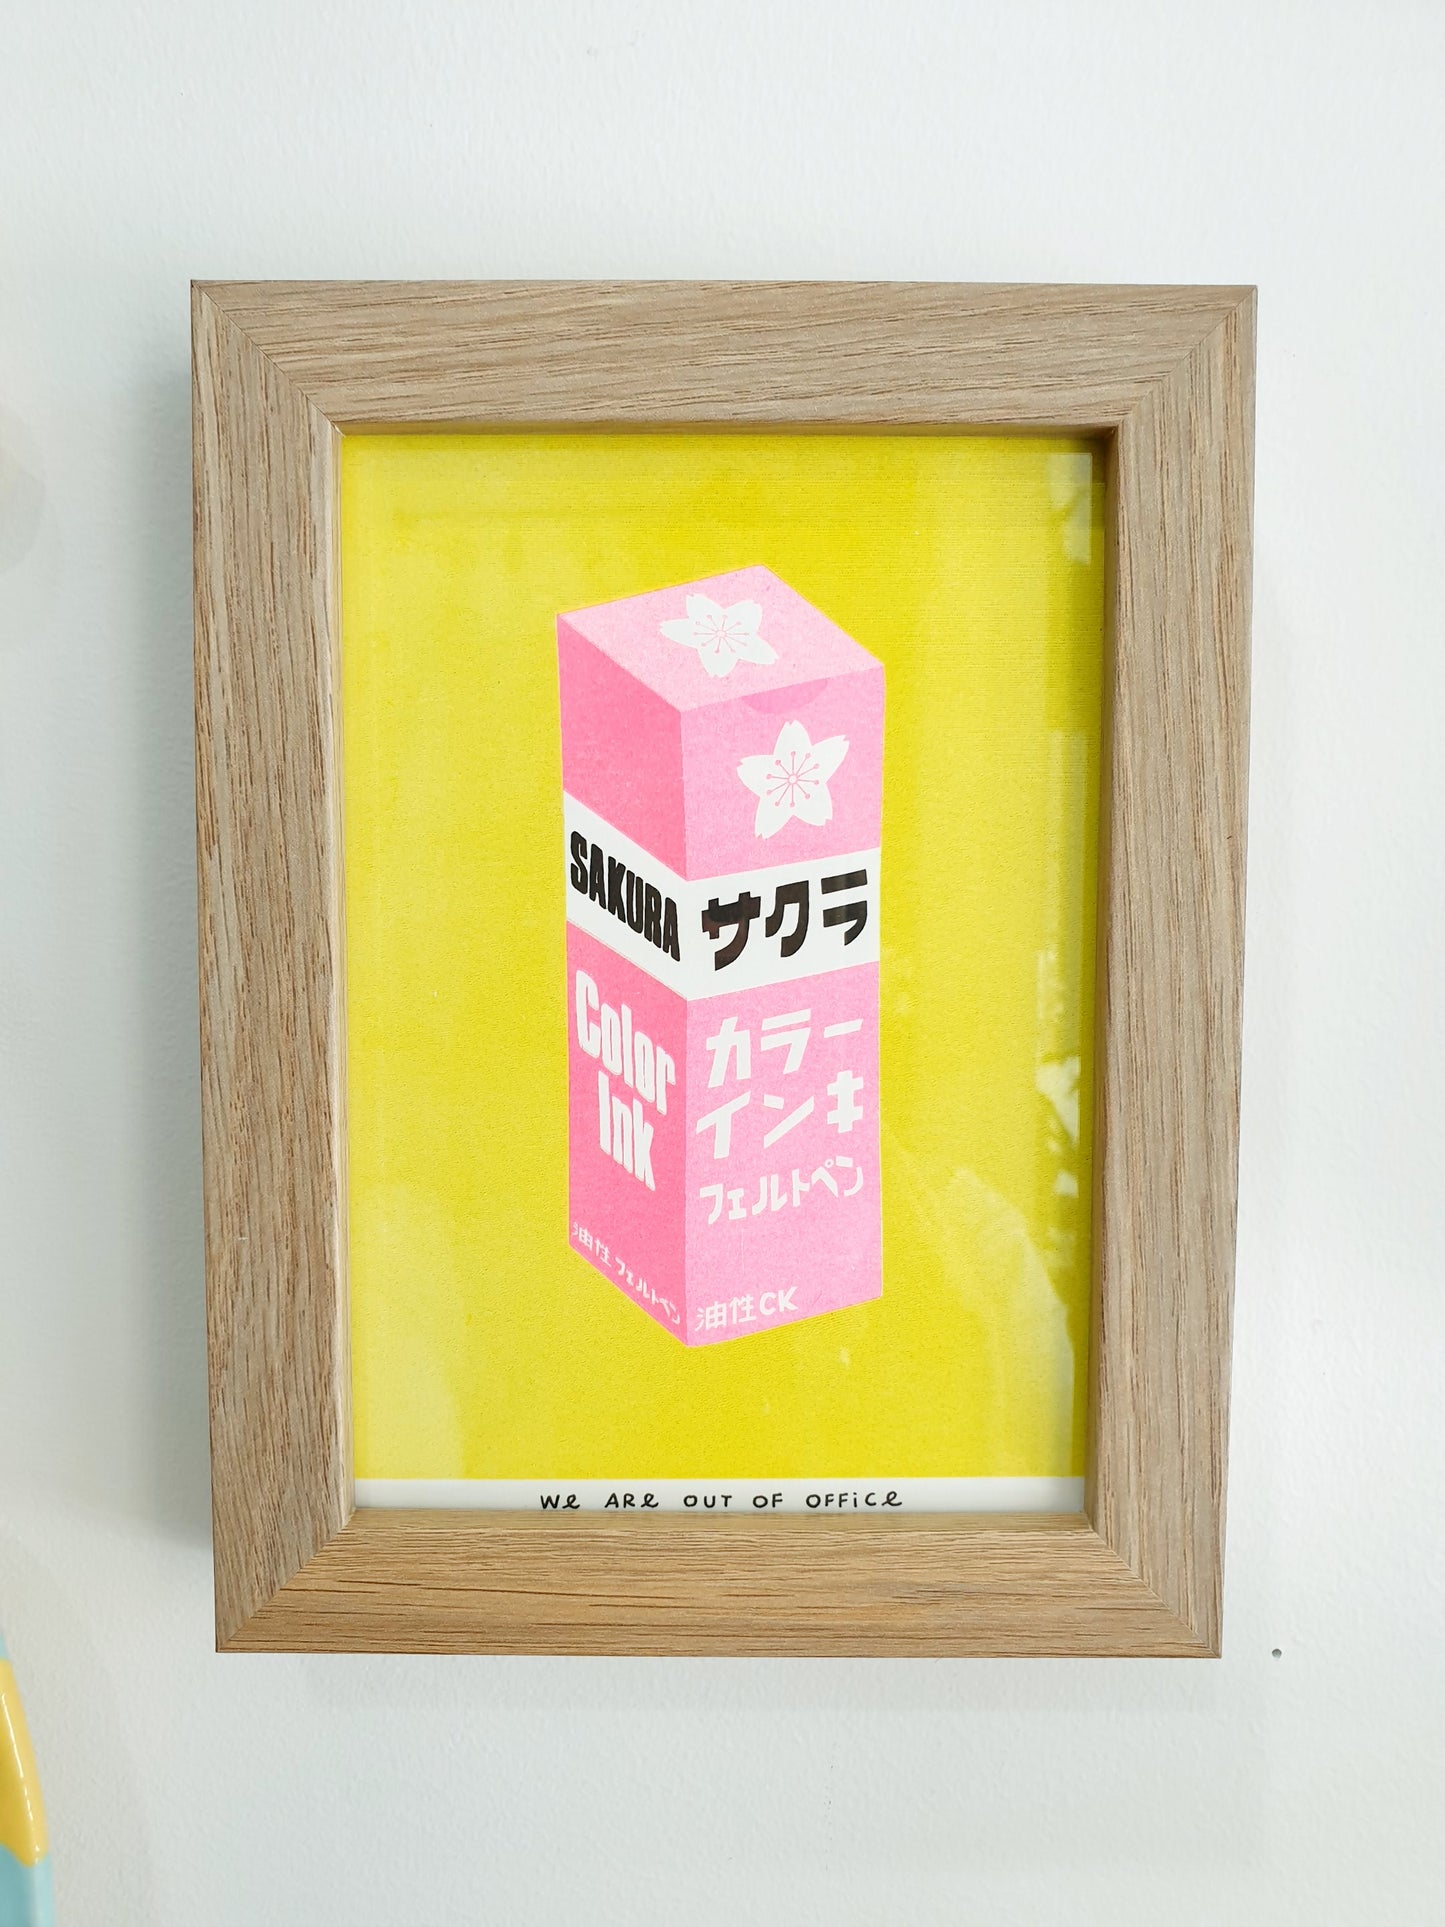 'A very bright bottle of Japanese sakura ink' - A framed risograph print by 'We are out of office'